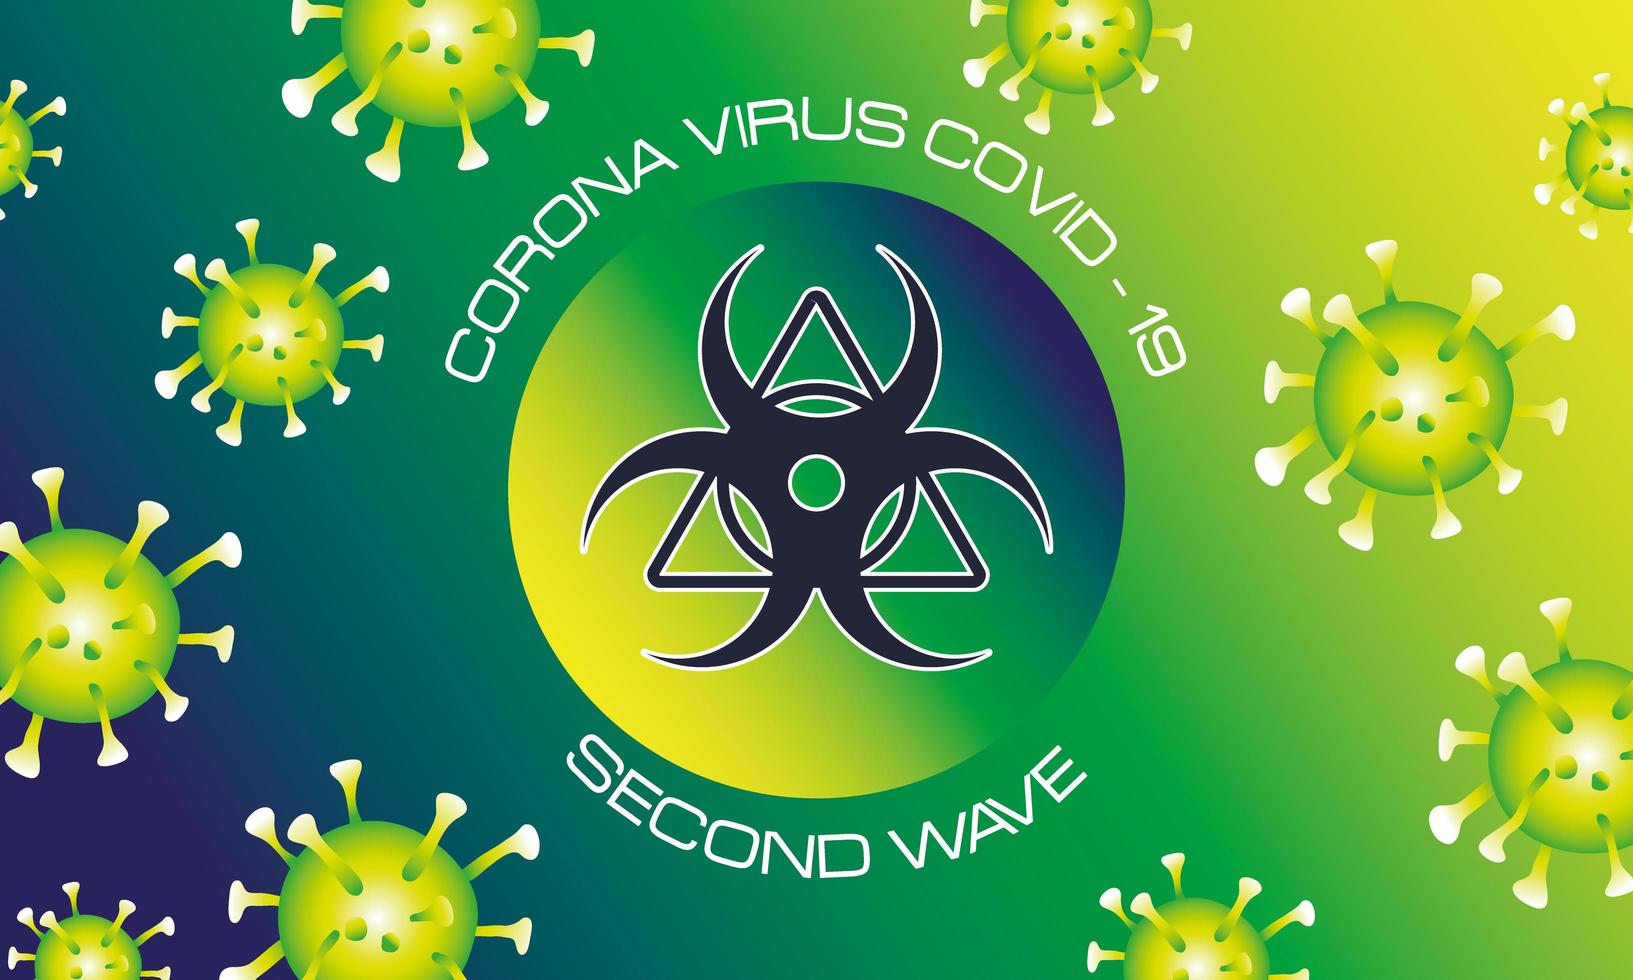 corona virus second wave poster with green particles and biohazard signal vector